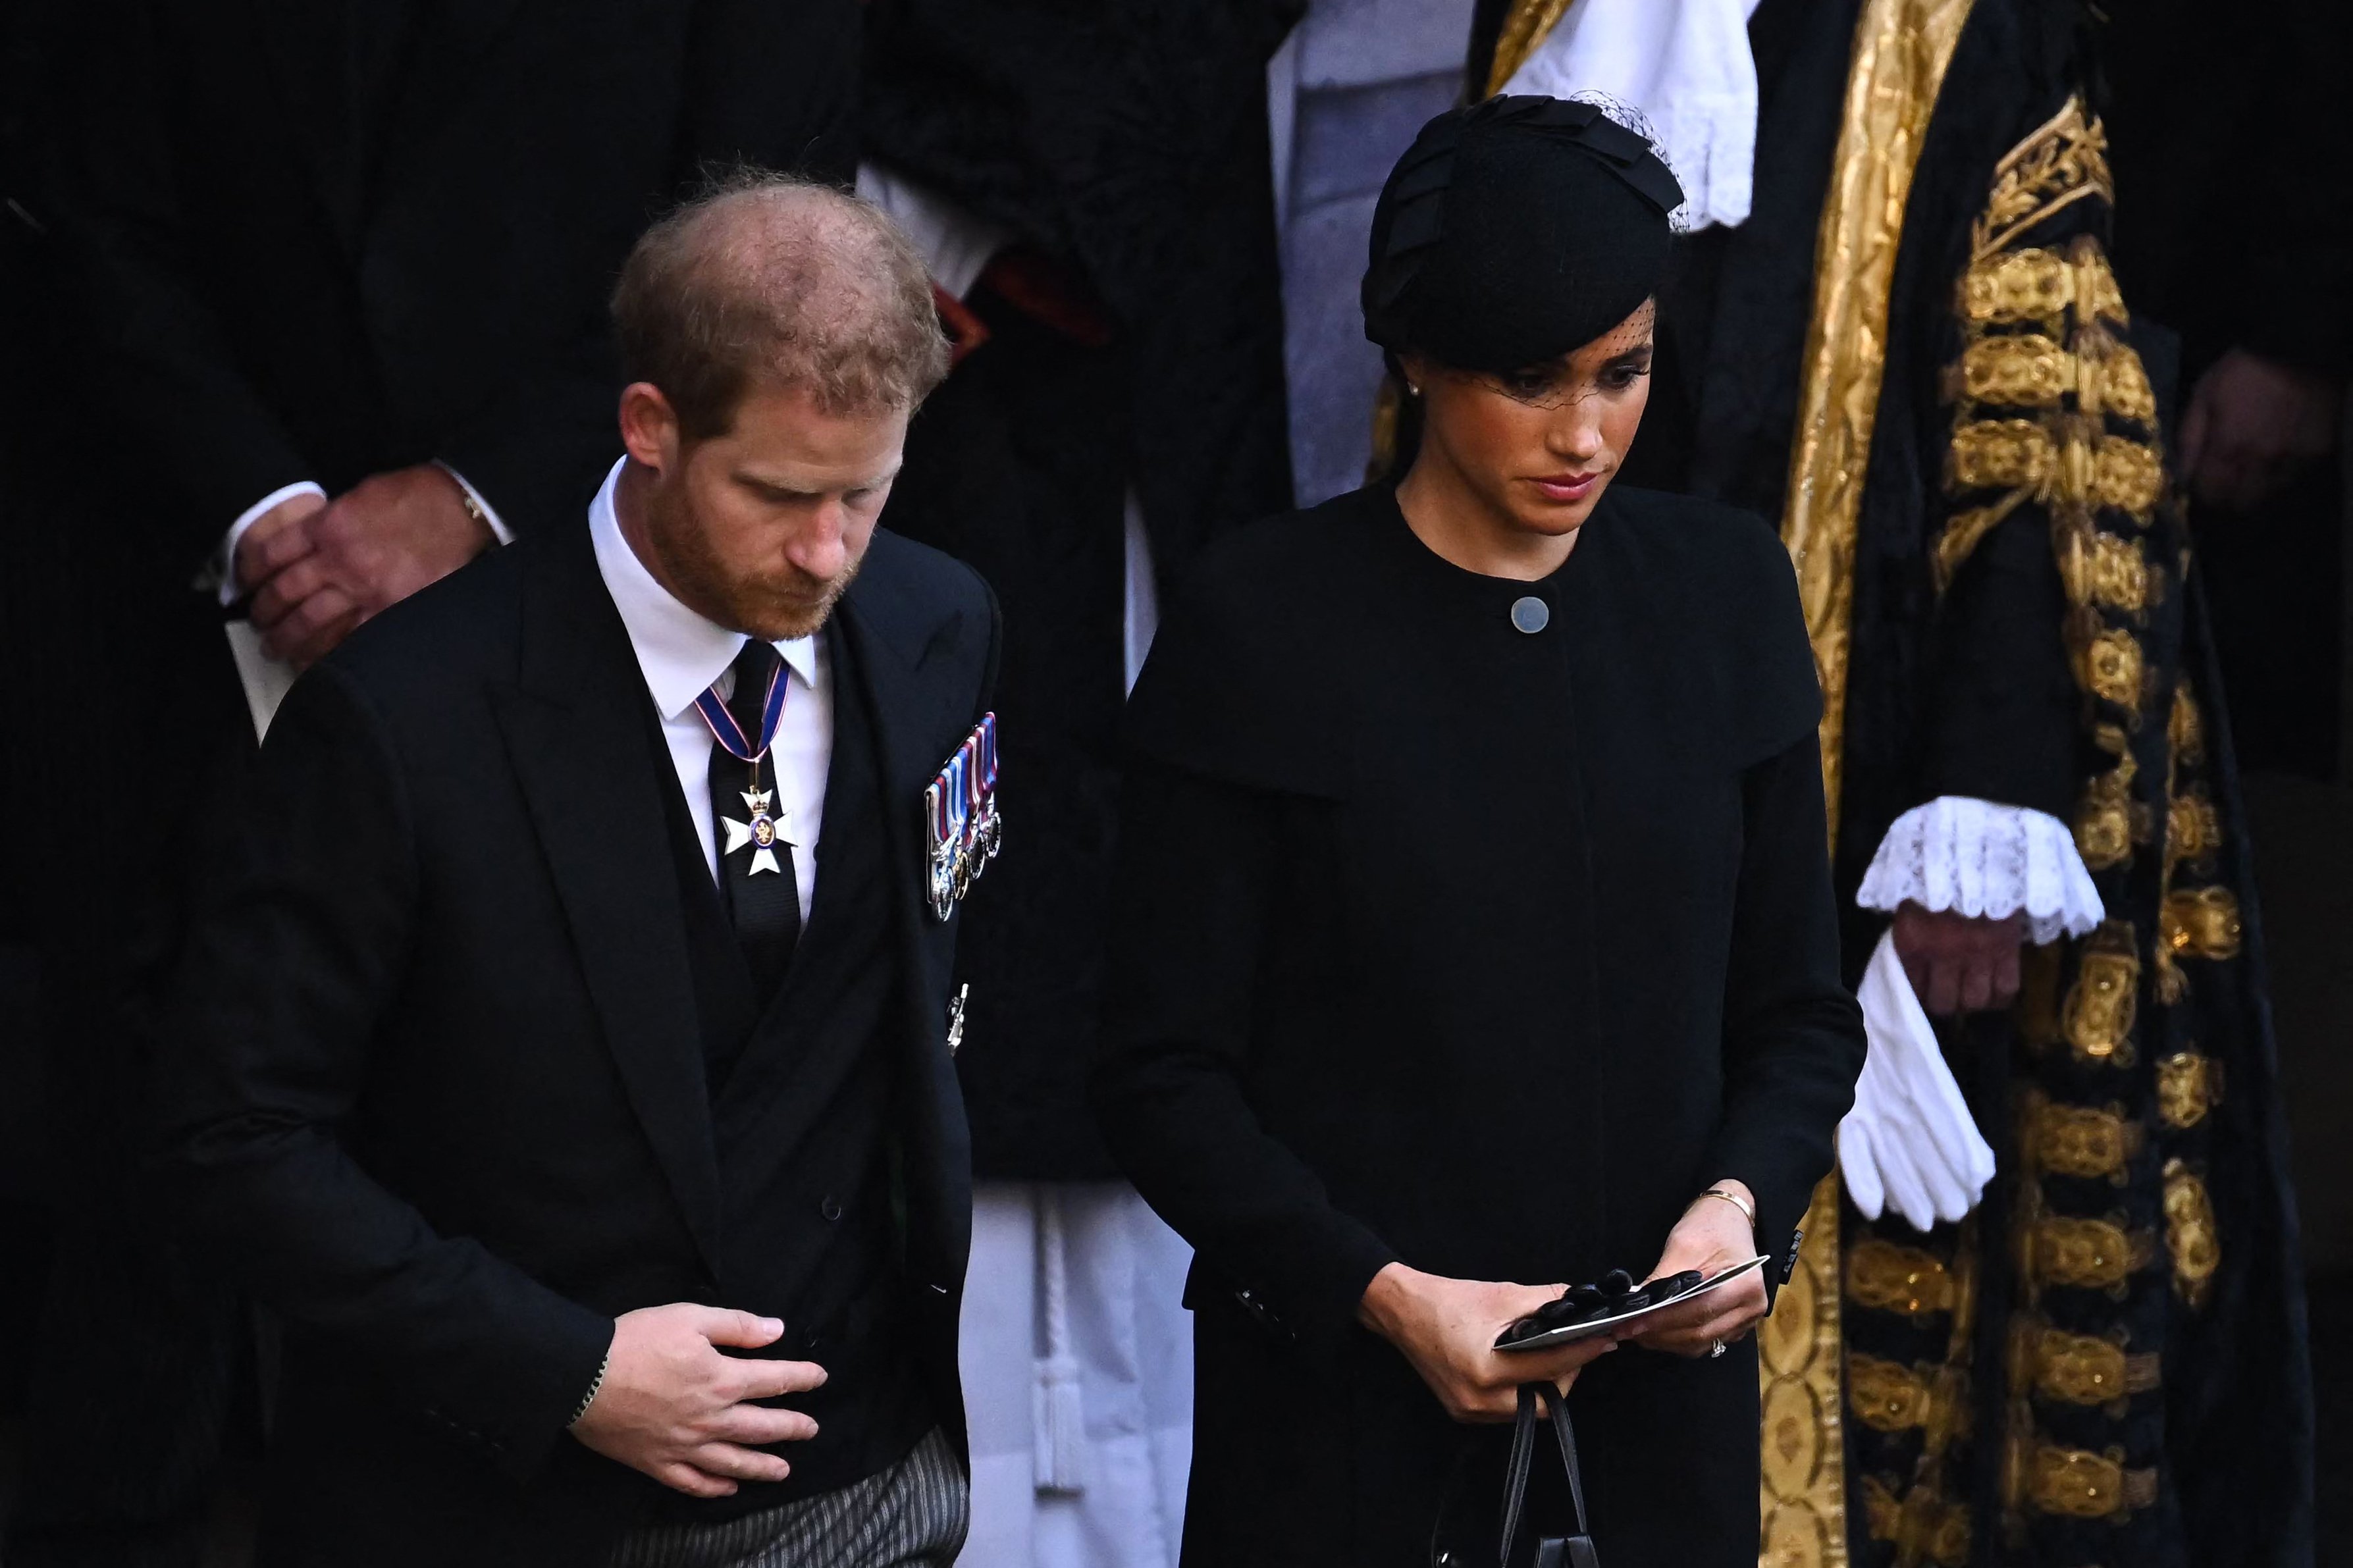 rince Harry, Duke of Sussex and Meghan, Duchess of Sussex leave after a service for the reception of Queen Elizabeth II's coffin at Westminster Hall, in the Palace of Westminster in London on September 14, 2022 | Source: Getty Images 